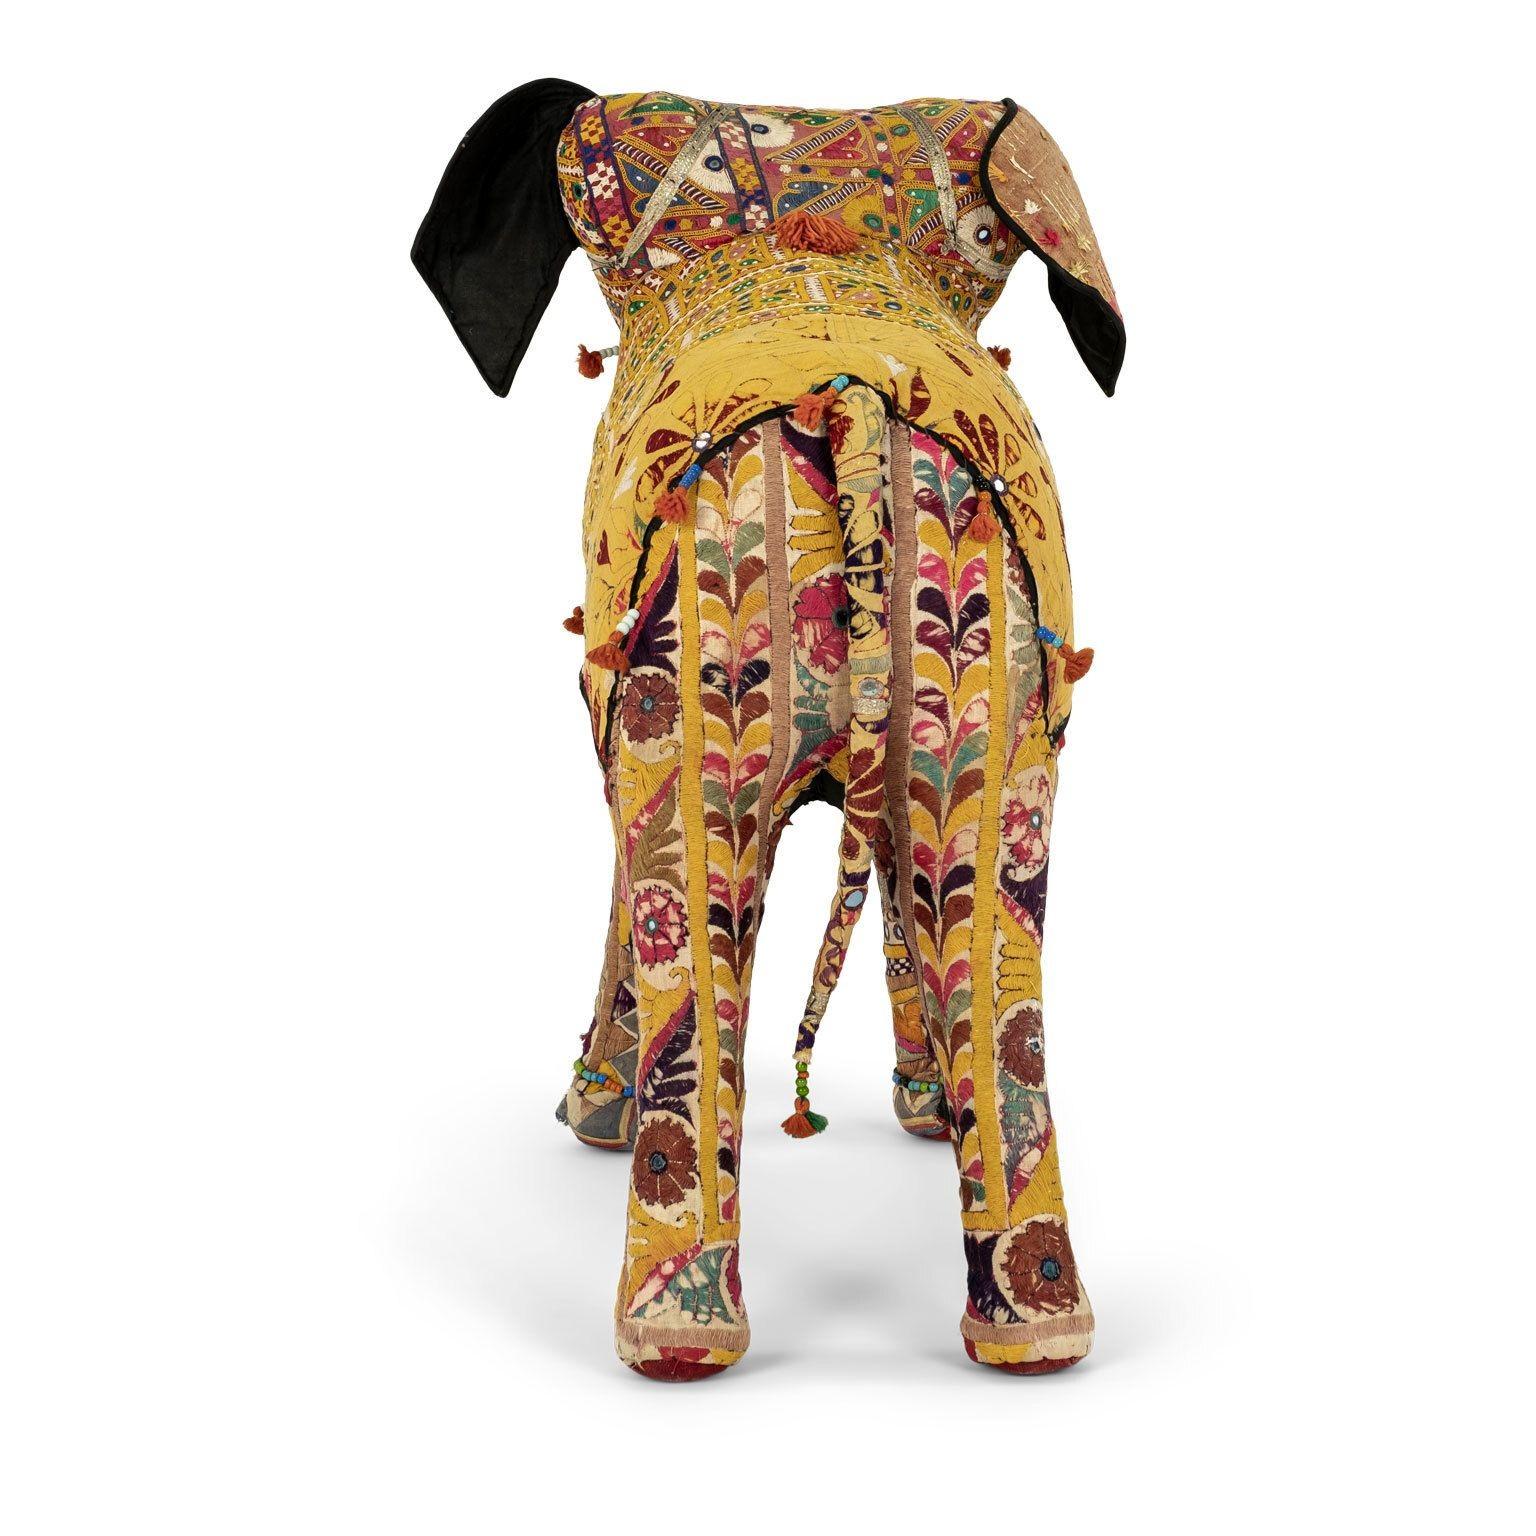 English Massive Vintage Cotton Elephant Covered in Indian Textiles For Sale